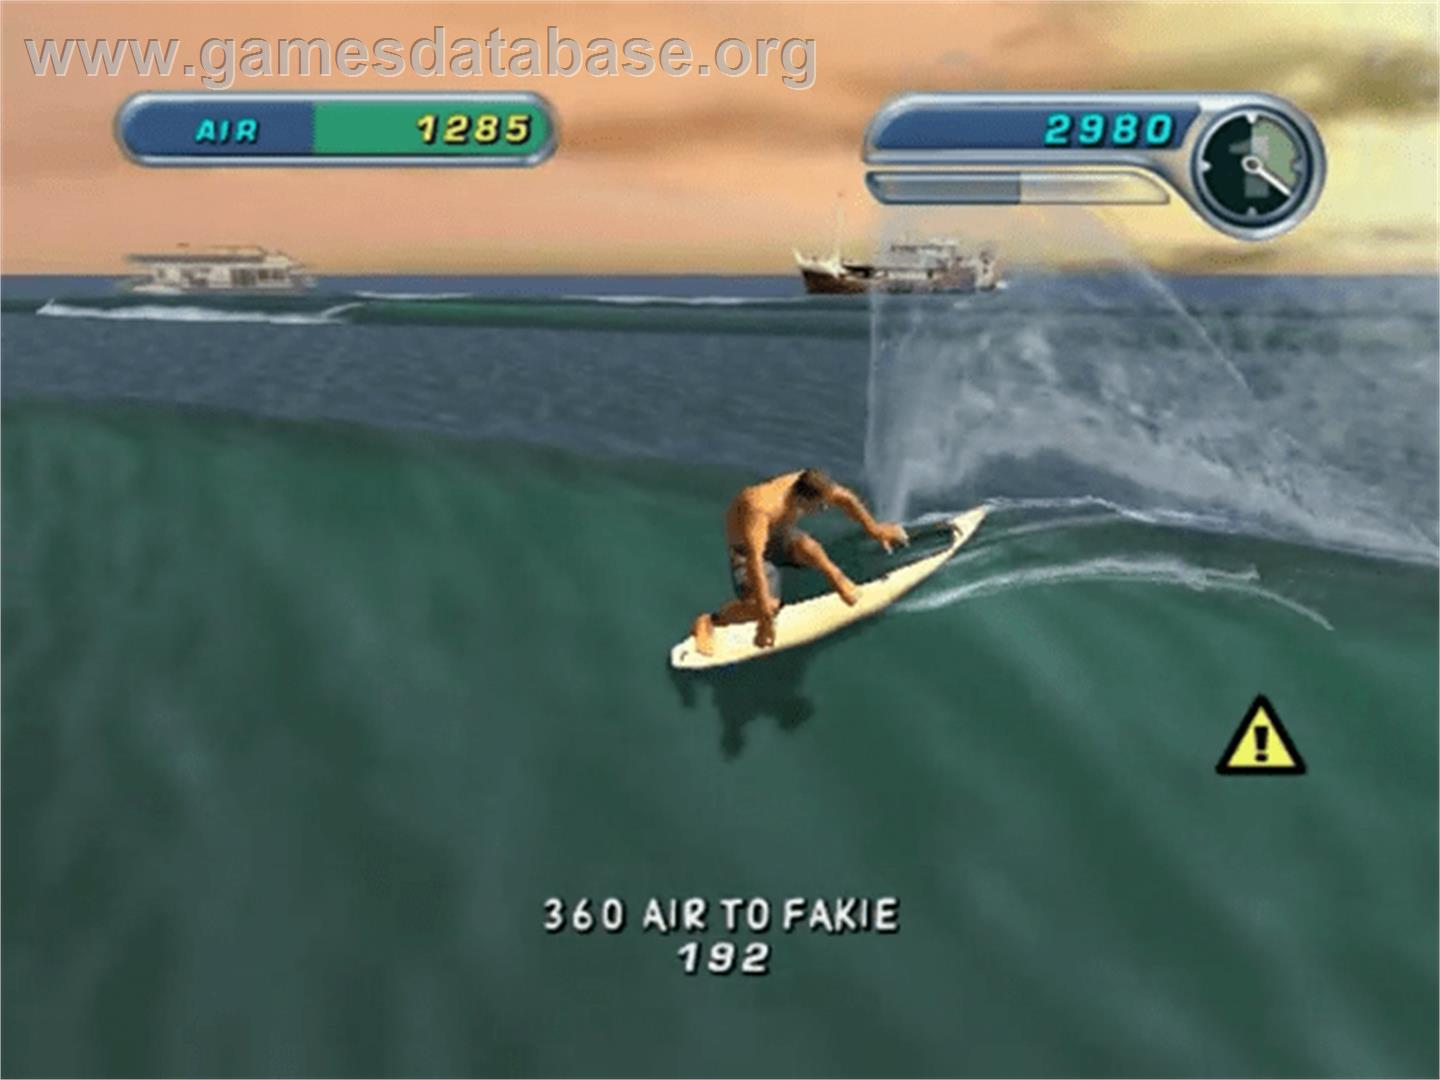 Kelly Slater's Pro Surfer - Sony Playstation 2 - Artwork - In Game